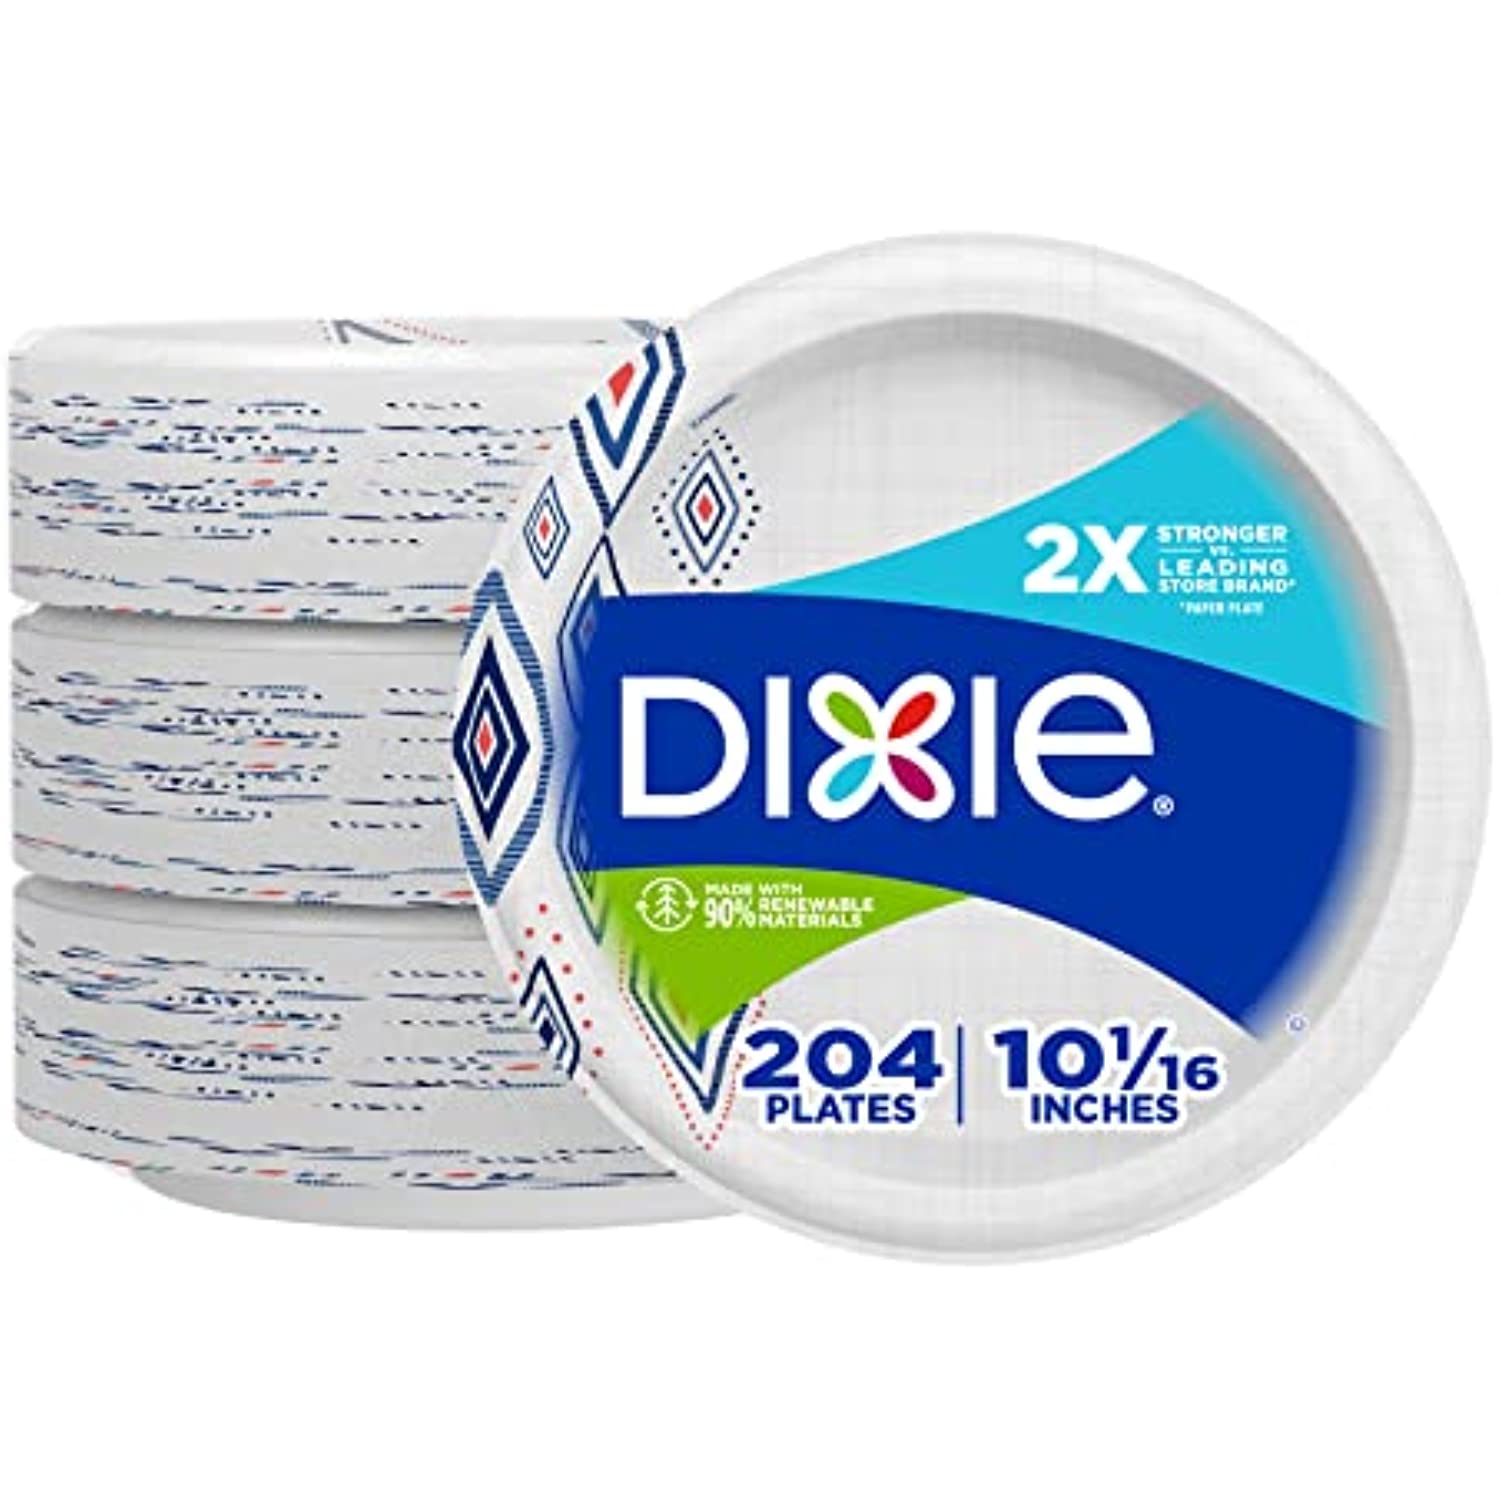 Dixie 10 inch Paper Plates, Dinner Size Printed Disposable Plate, 204 Count (3 Packs of 68 Plates), Size: 2XL